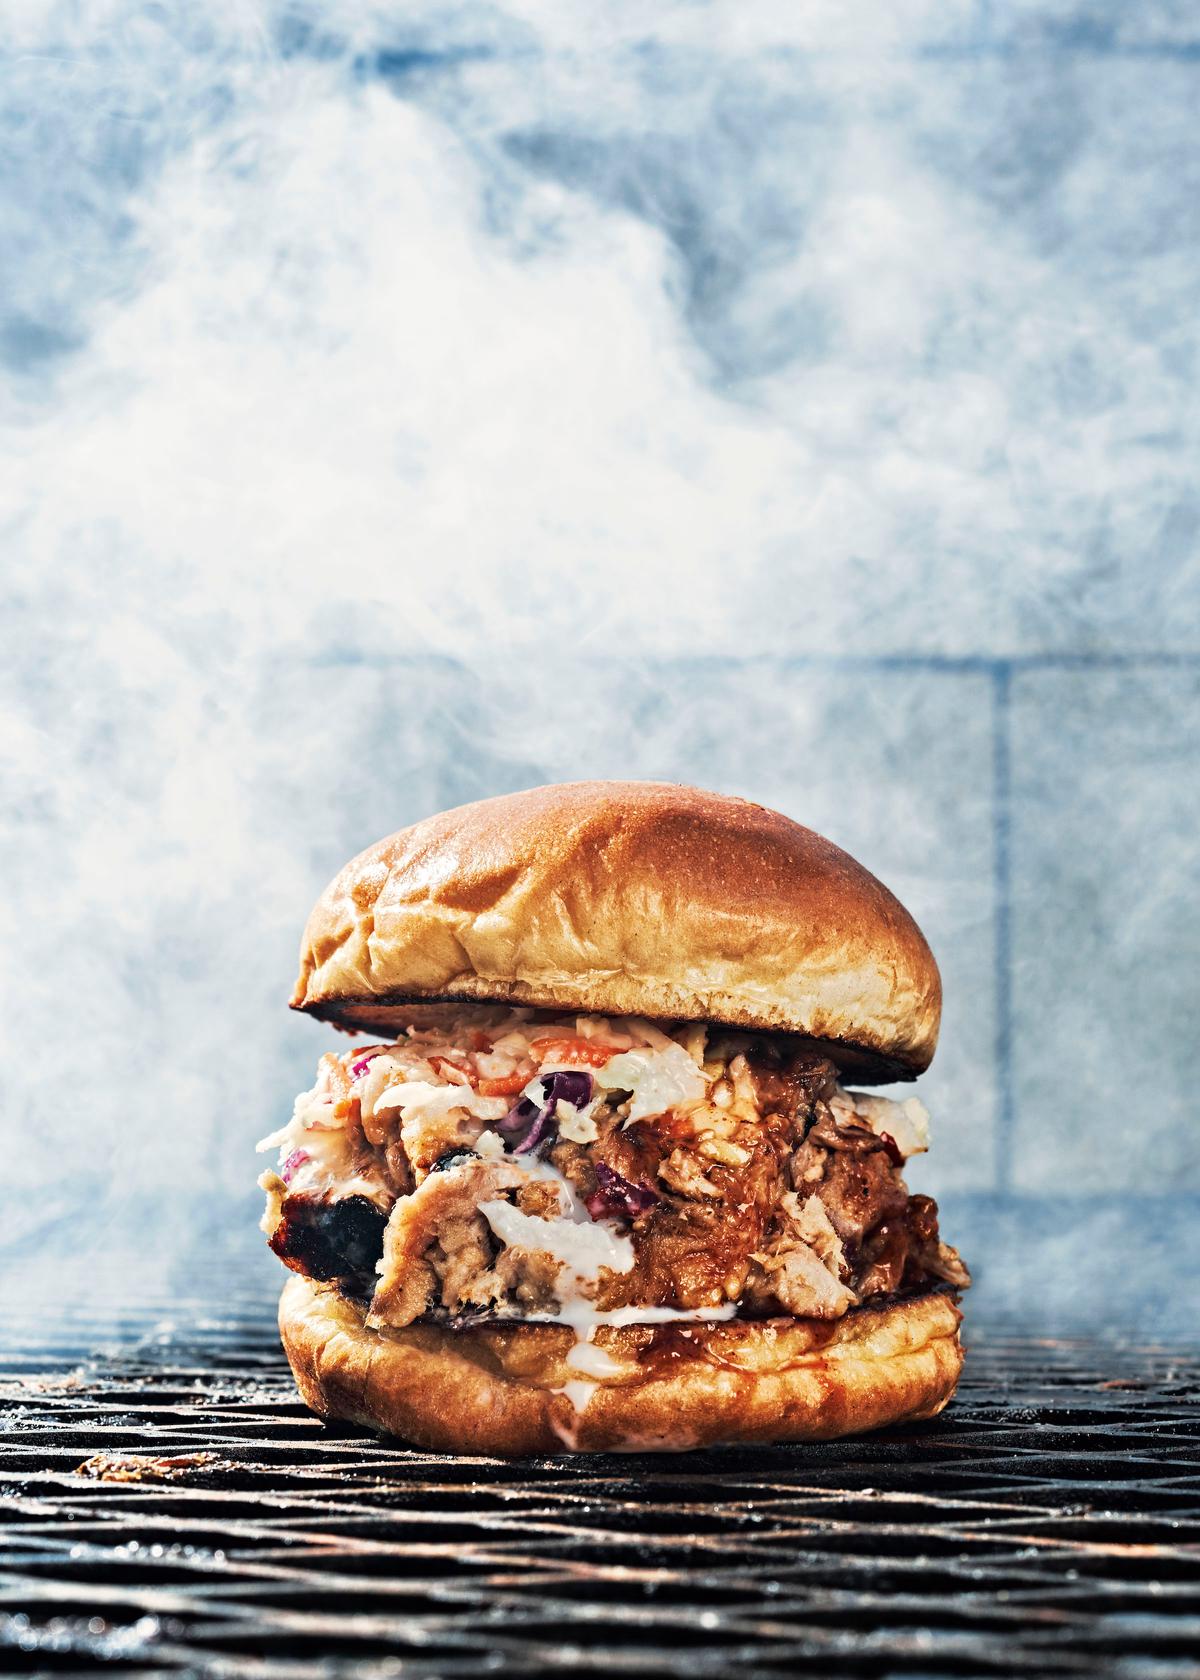 The reward: Martin's famed pulled pork sandwich is made with meat pulled straight off the hog, topped with coleslaw. (Courtesy of Andrew Thomas Photography)